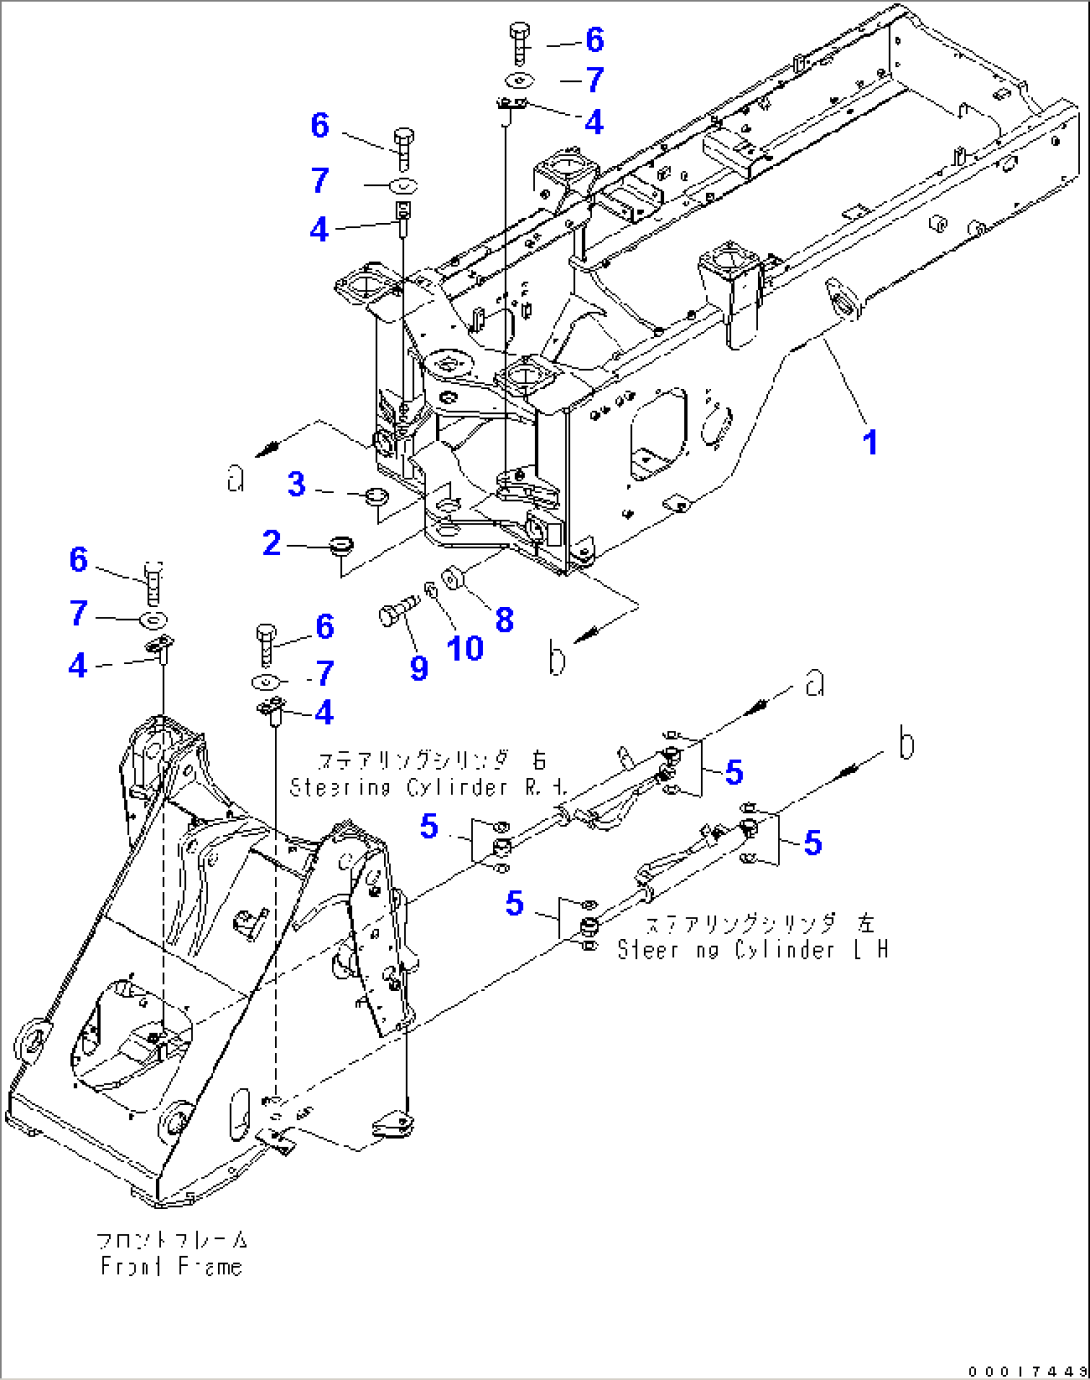 REAR FRAME (FOR ADDITIONAL COUNTERWEIGHT)